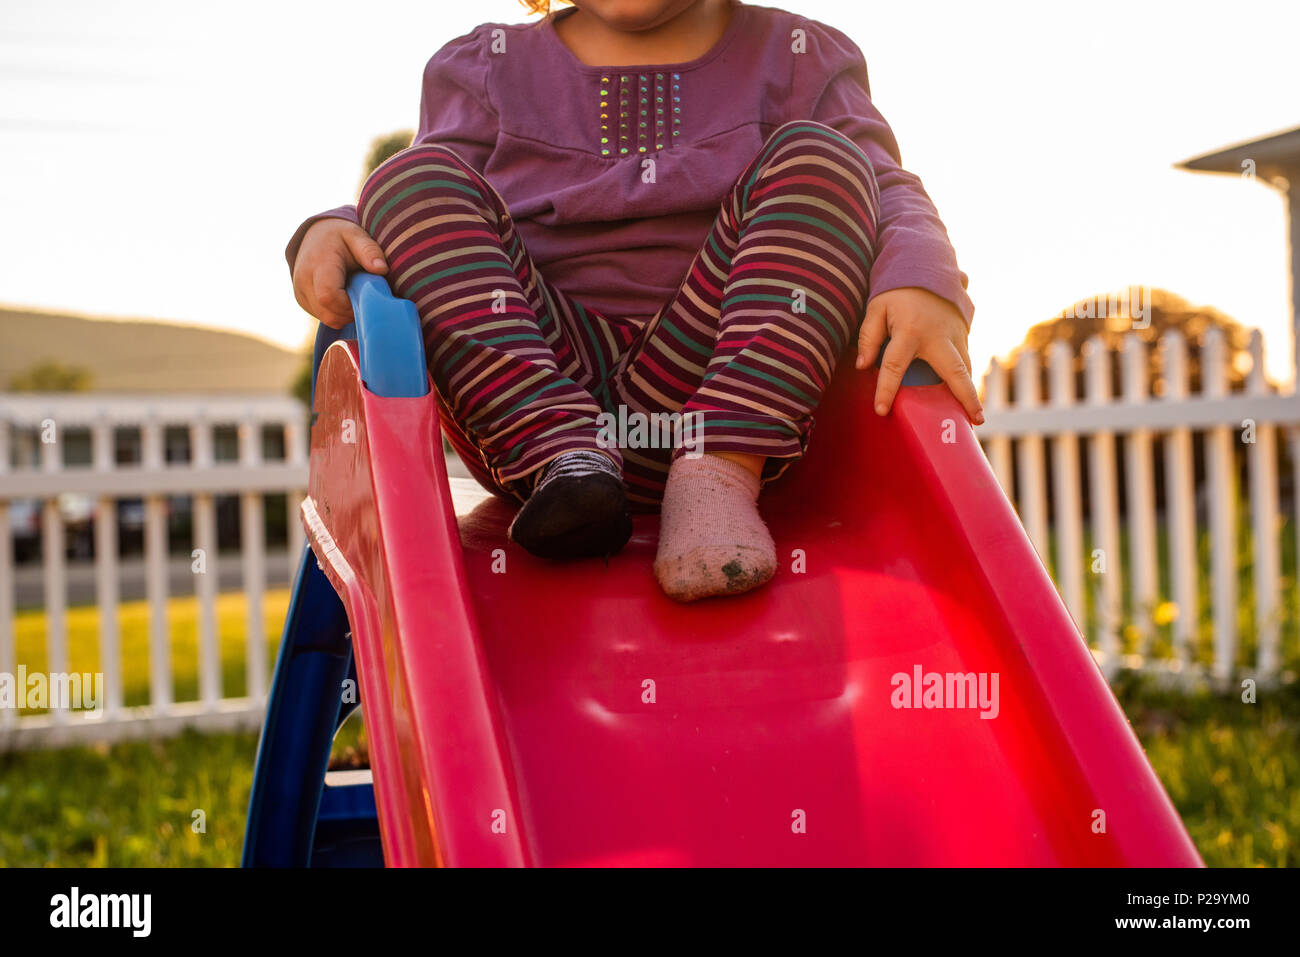 A little girl wearing striped pants and dancing on a slide. Stock Photo